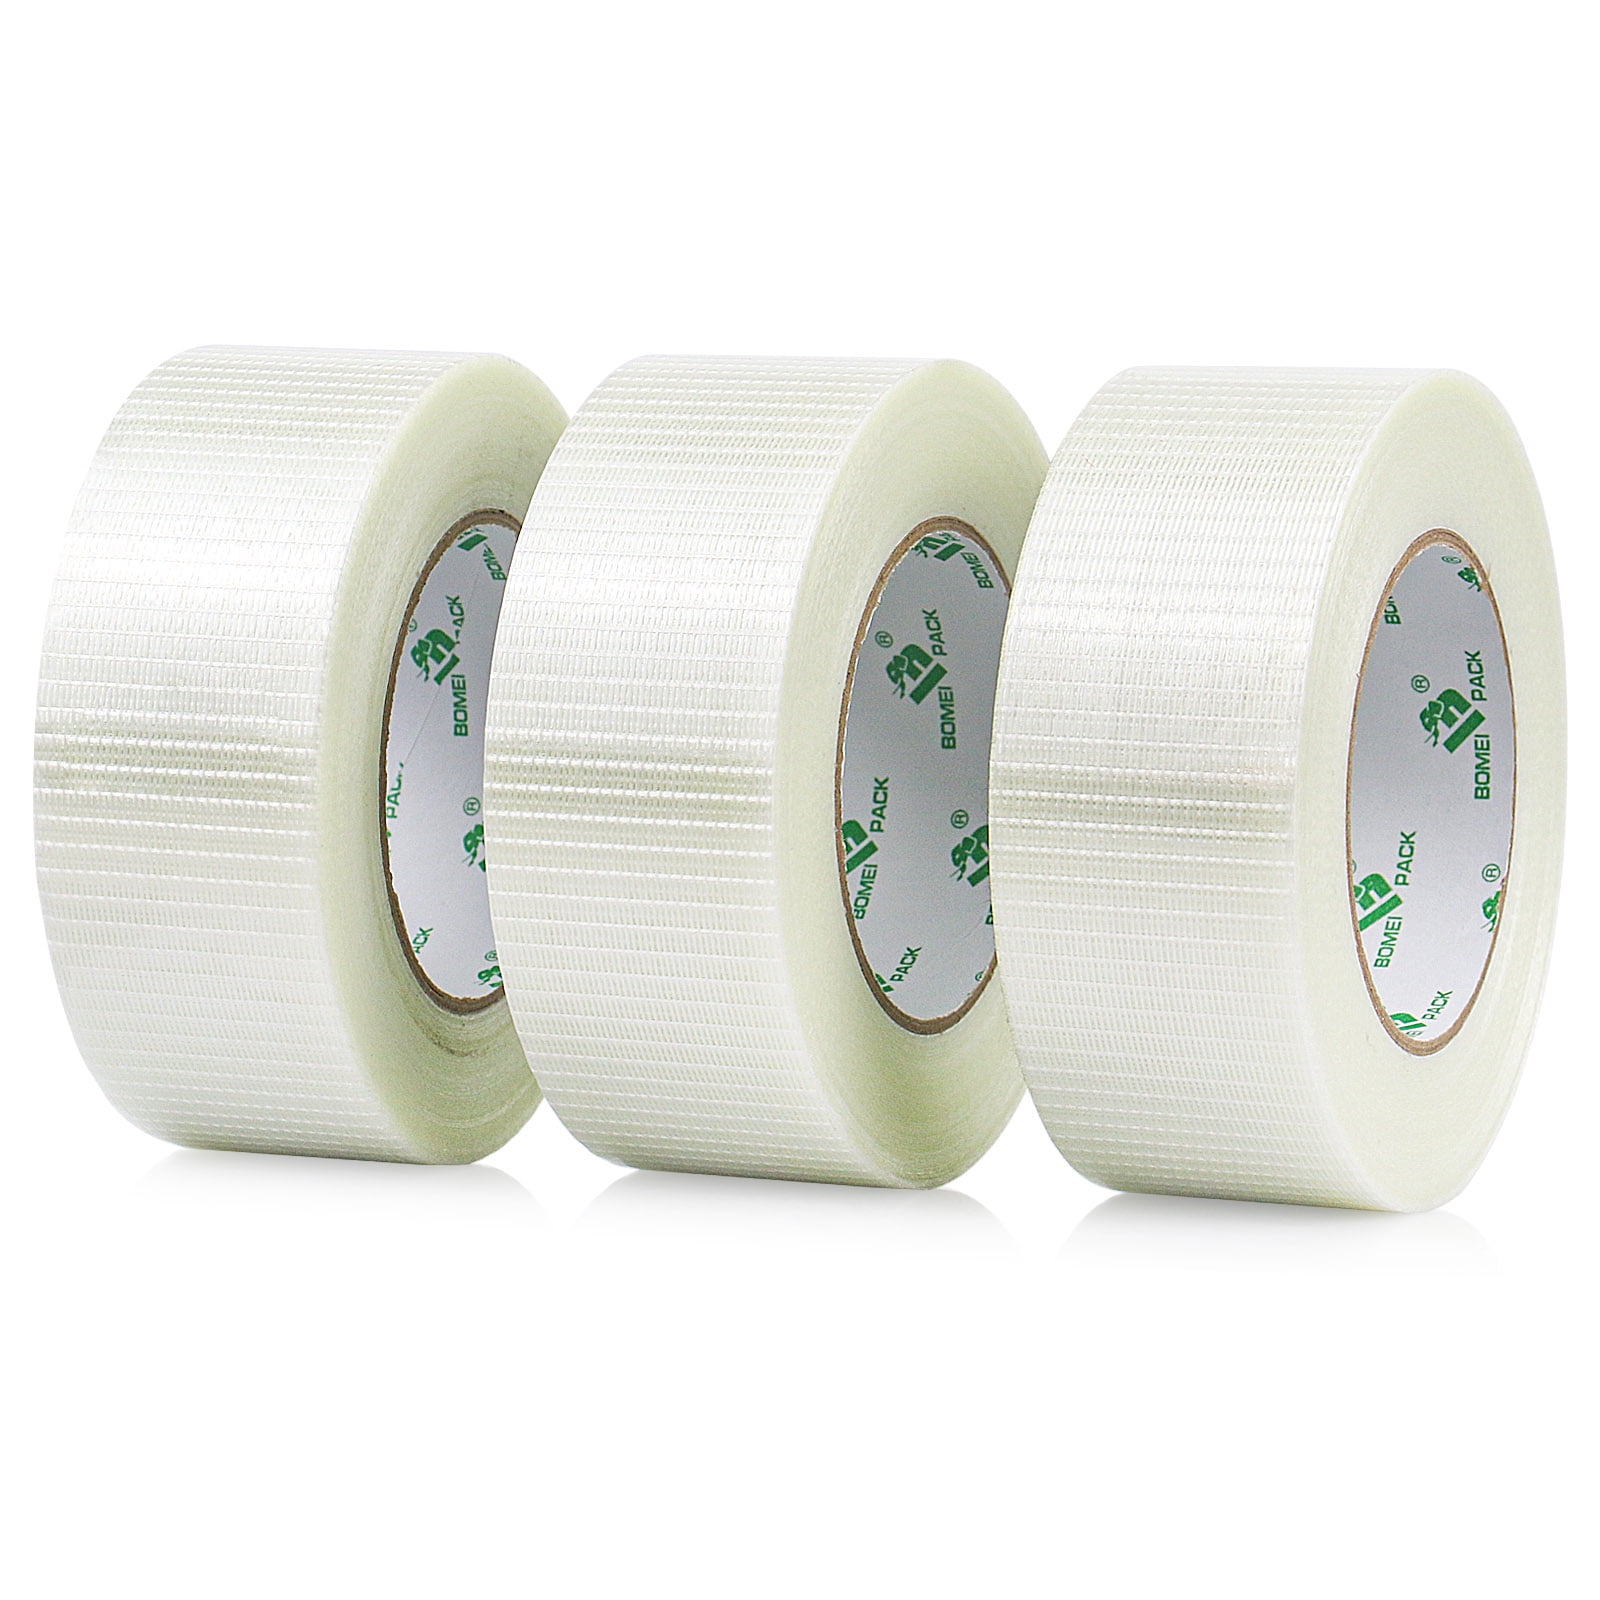 ULTECHNOVO 2pcs Adhesive Tape Heavy Duty Packaging Tape Fabric Repair Tape  Clear Packing Tape Refill Masking Gummed Water Activated Gummed Tape